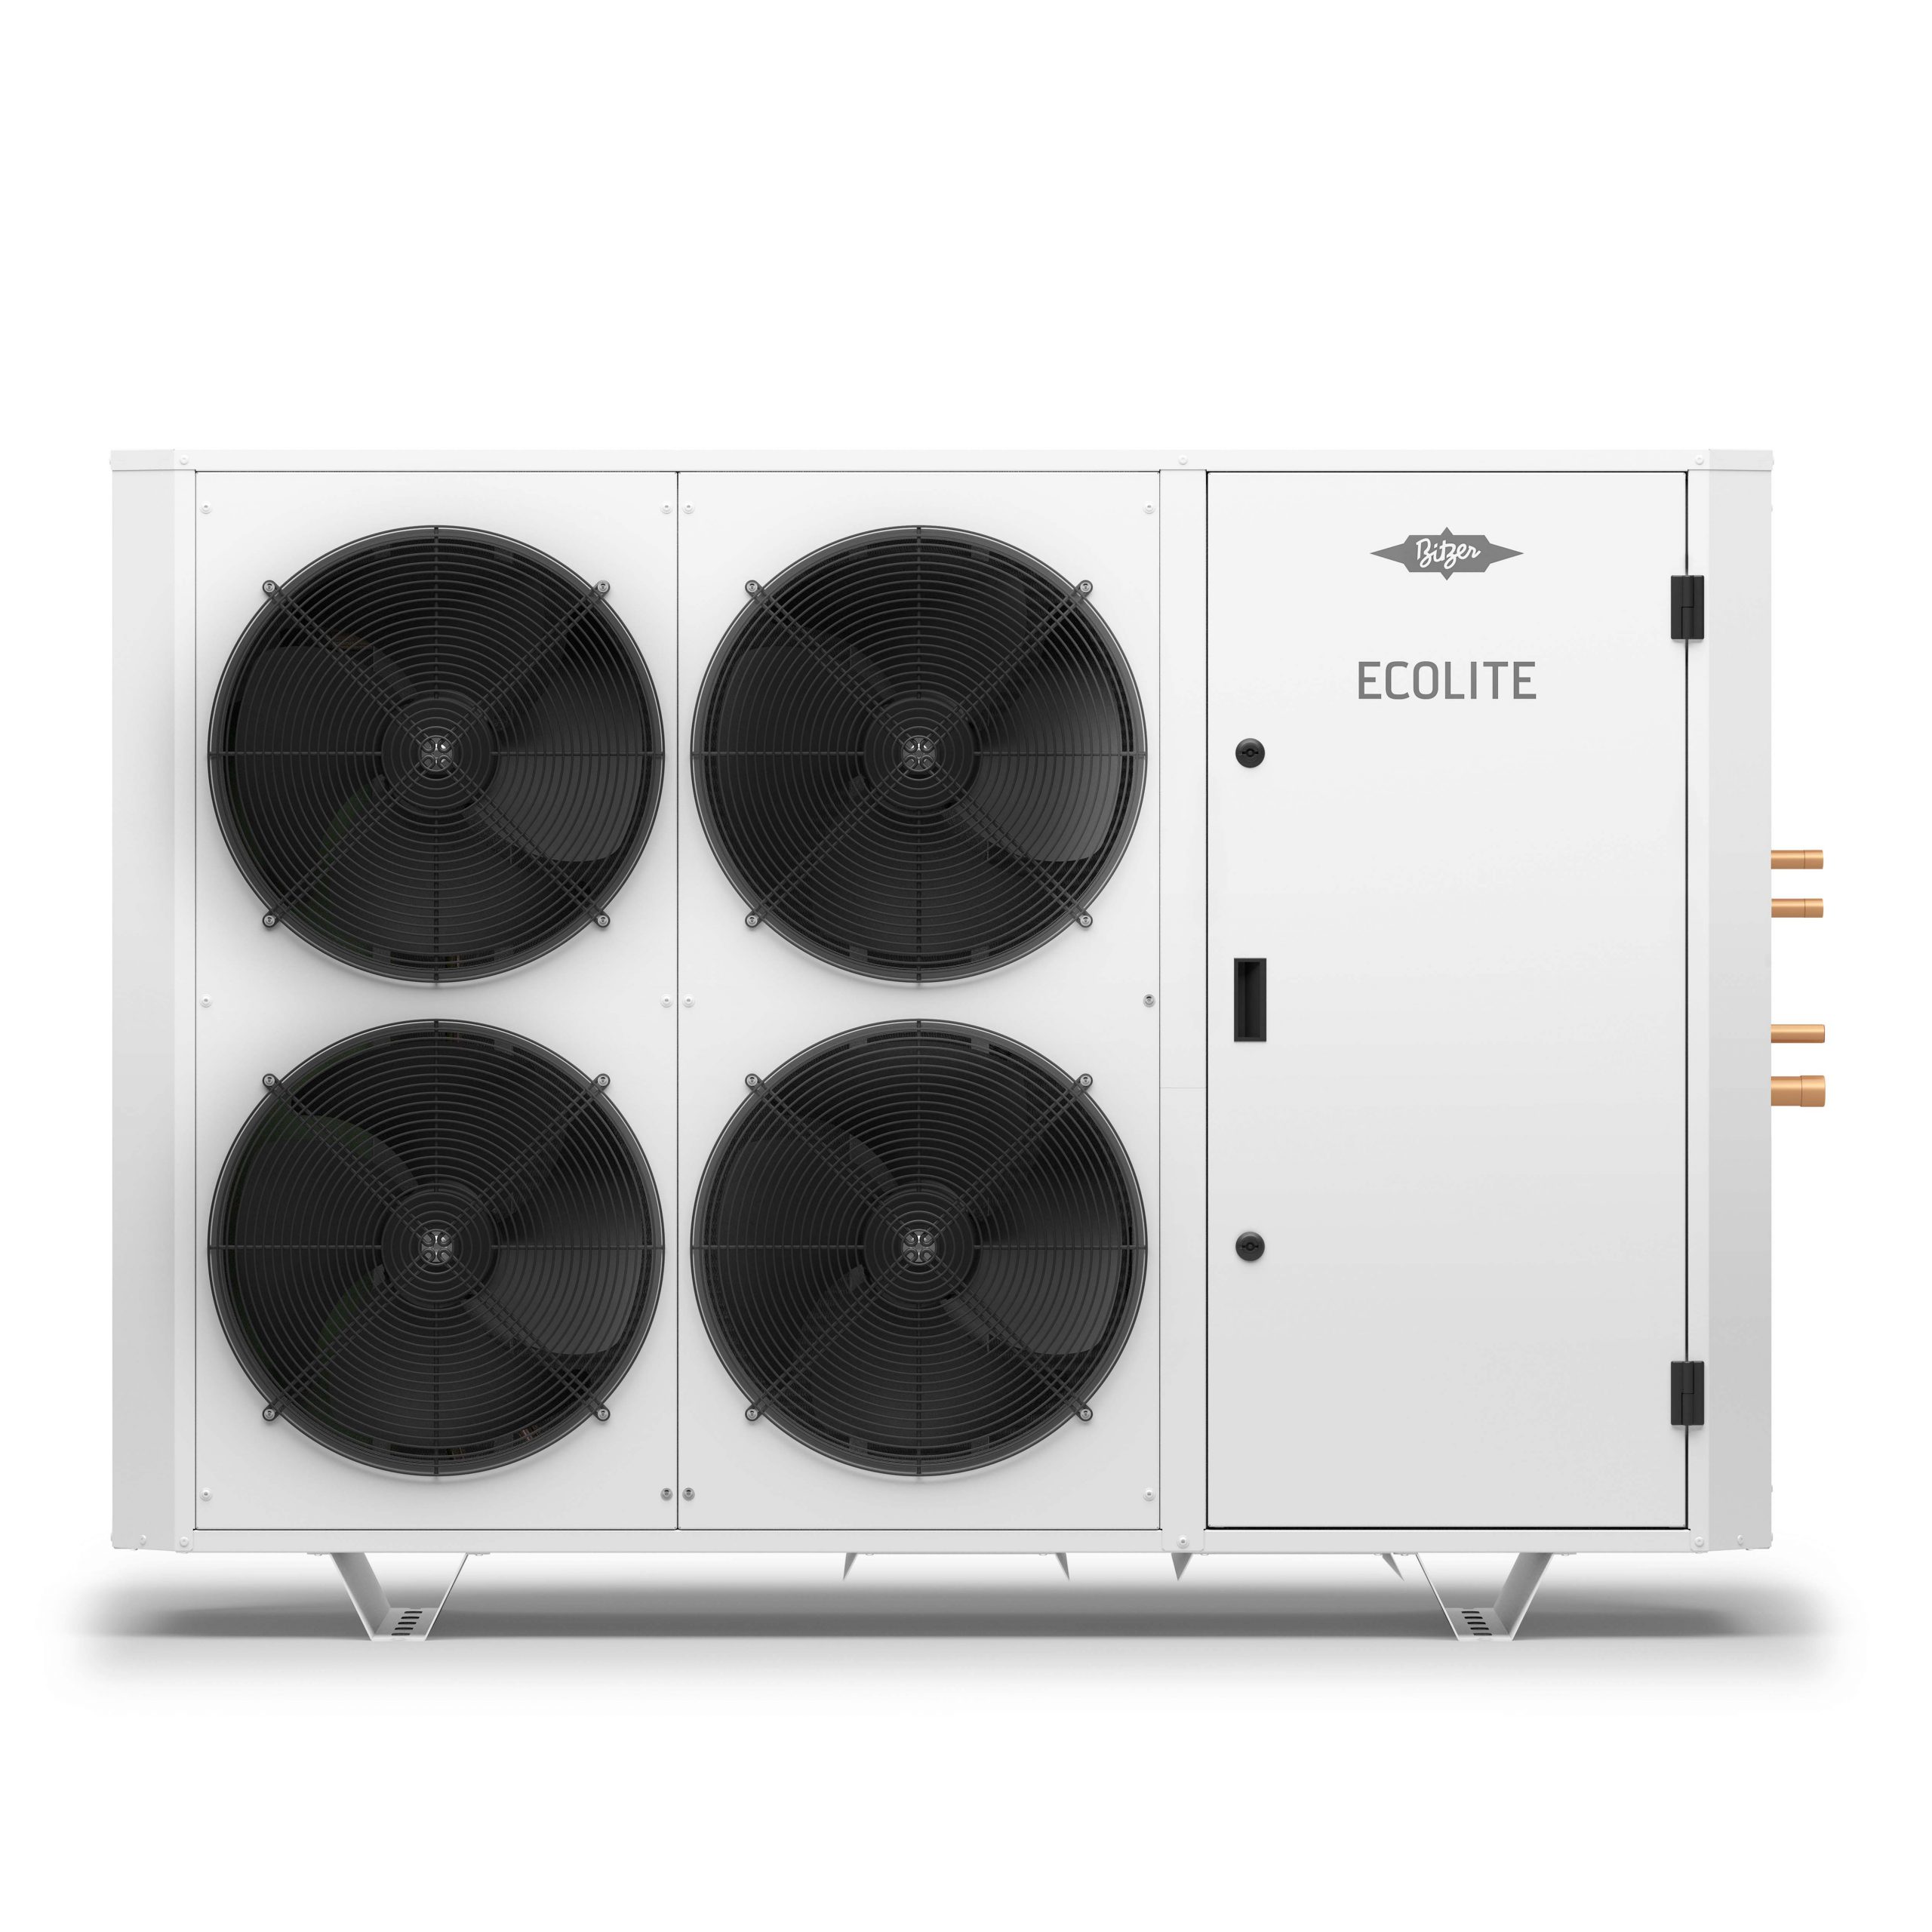 BITZER ECOLITE LHL7E – condensing units with expanded capacity range for commercial refrigeration.